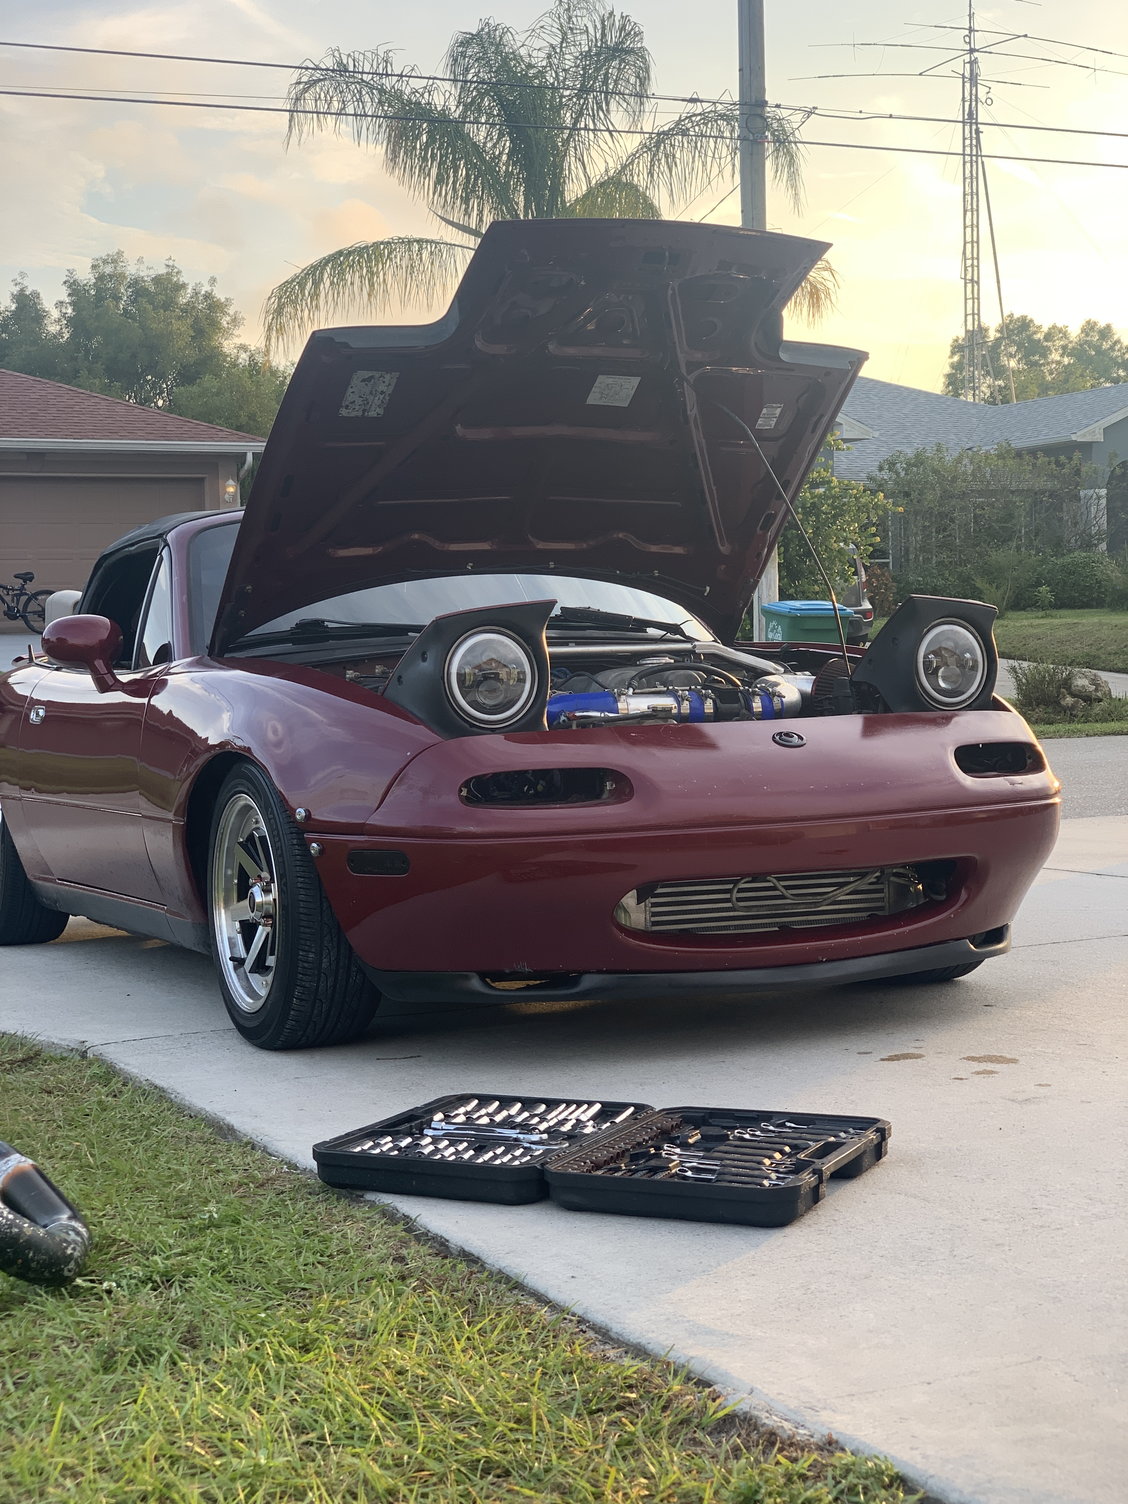 Your stock light housings will self-destruct when you try to remove them. –  Flyin' Miata